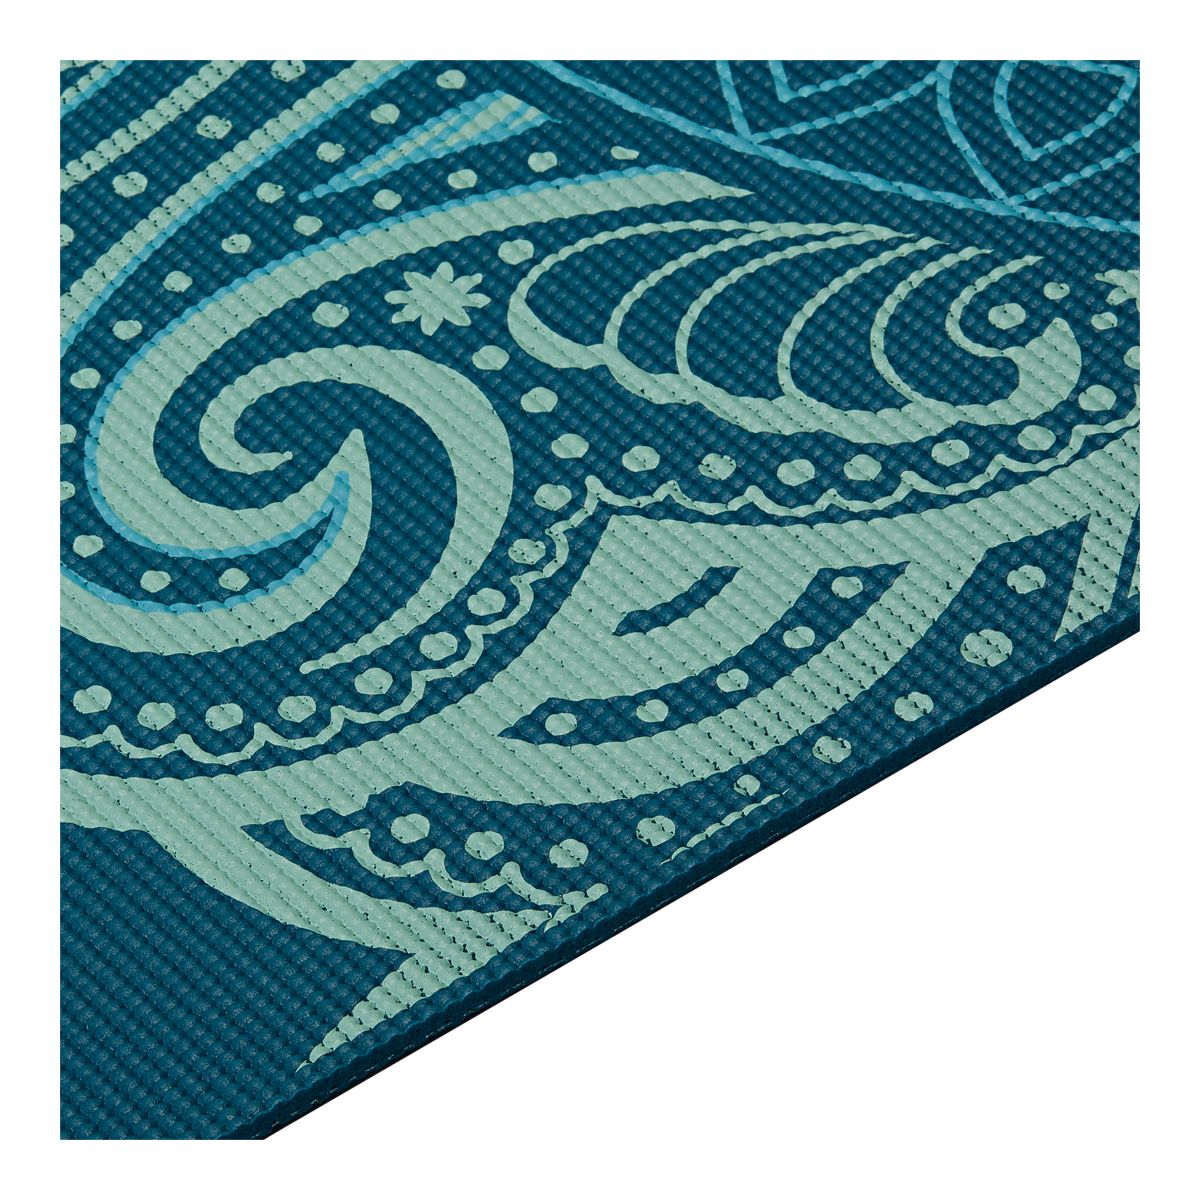 Buy Womanly by Manly Yoga Mat PVC 6mm 2024 Online